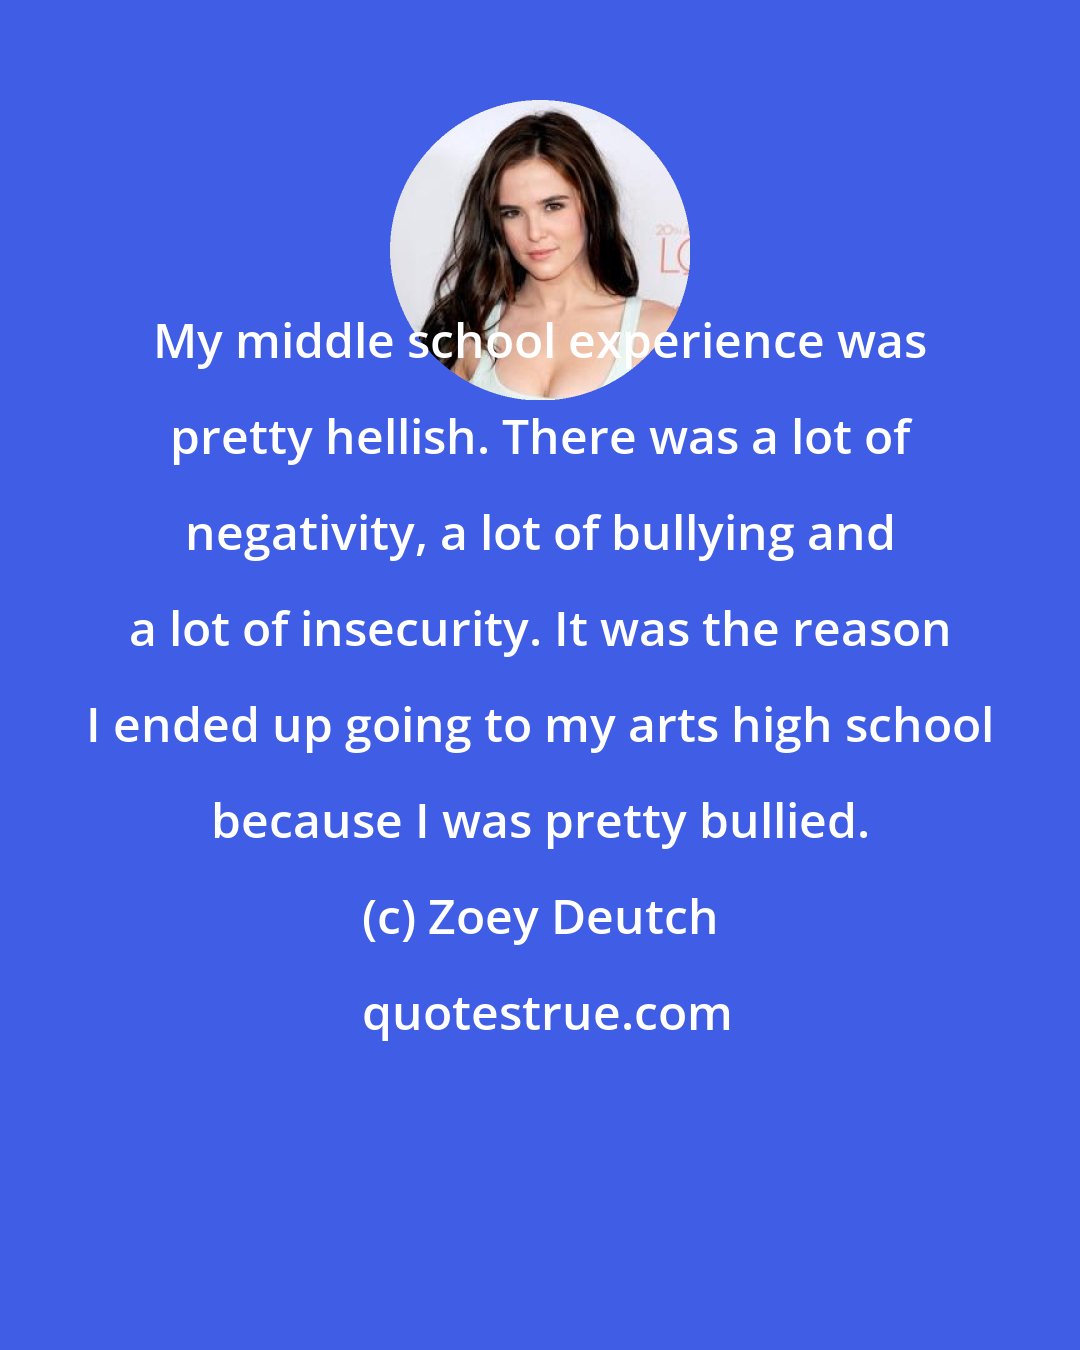 Zoey Deutch: My middle school experience was pretty hellish. There was a lot of negativity, a lot of bullying and a lot of insecurity. It was the reason I ended up going to my arts high school because I was pretty bullied.